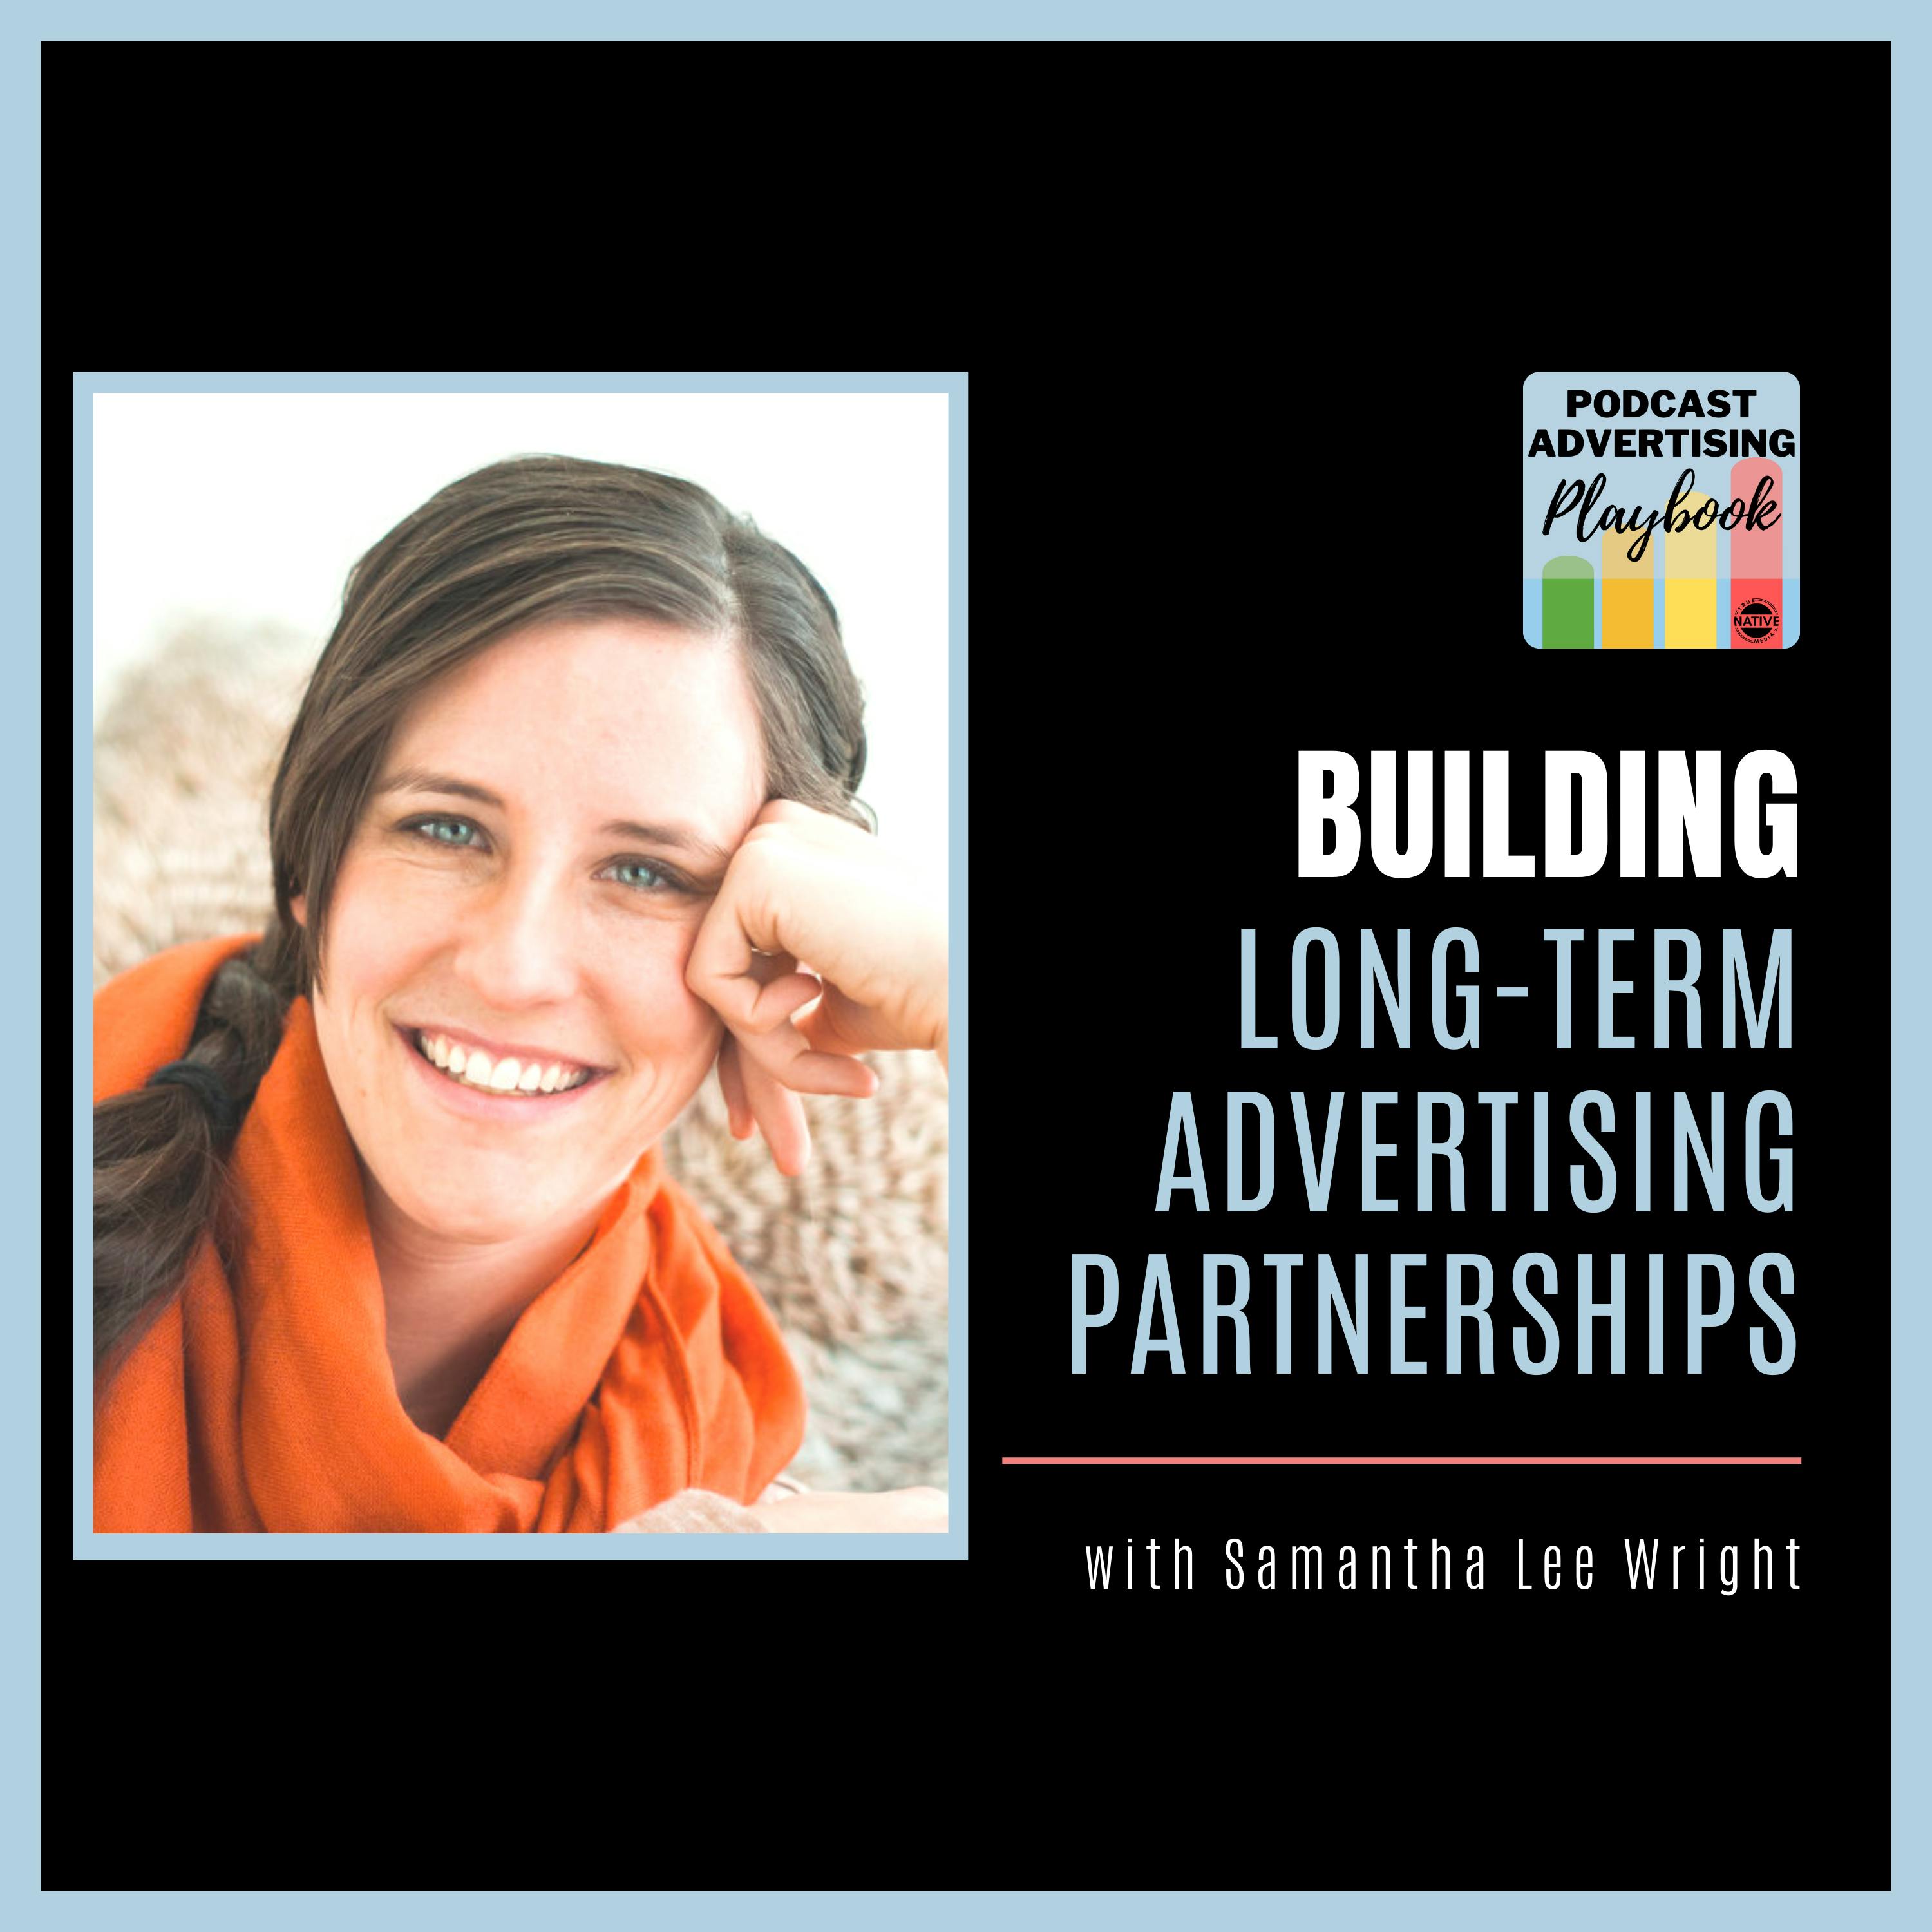 How To Secure Long-Term Podcast Advertising Partnerships Image